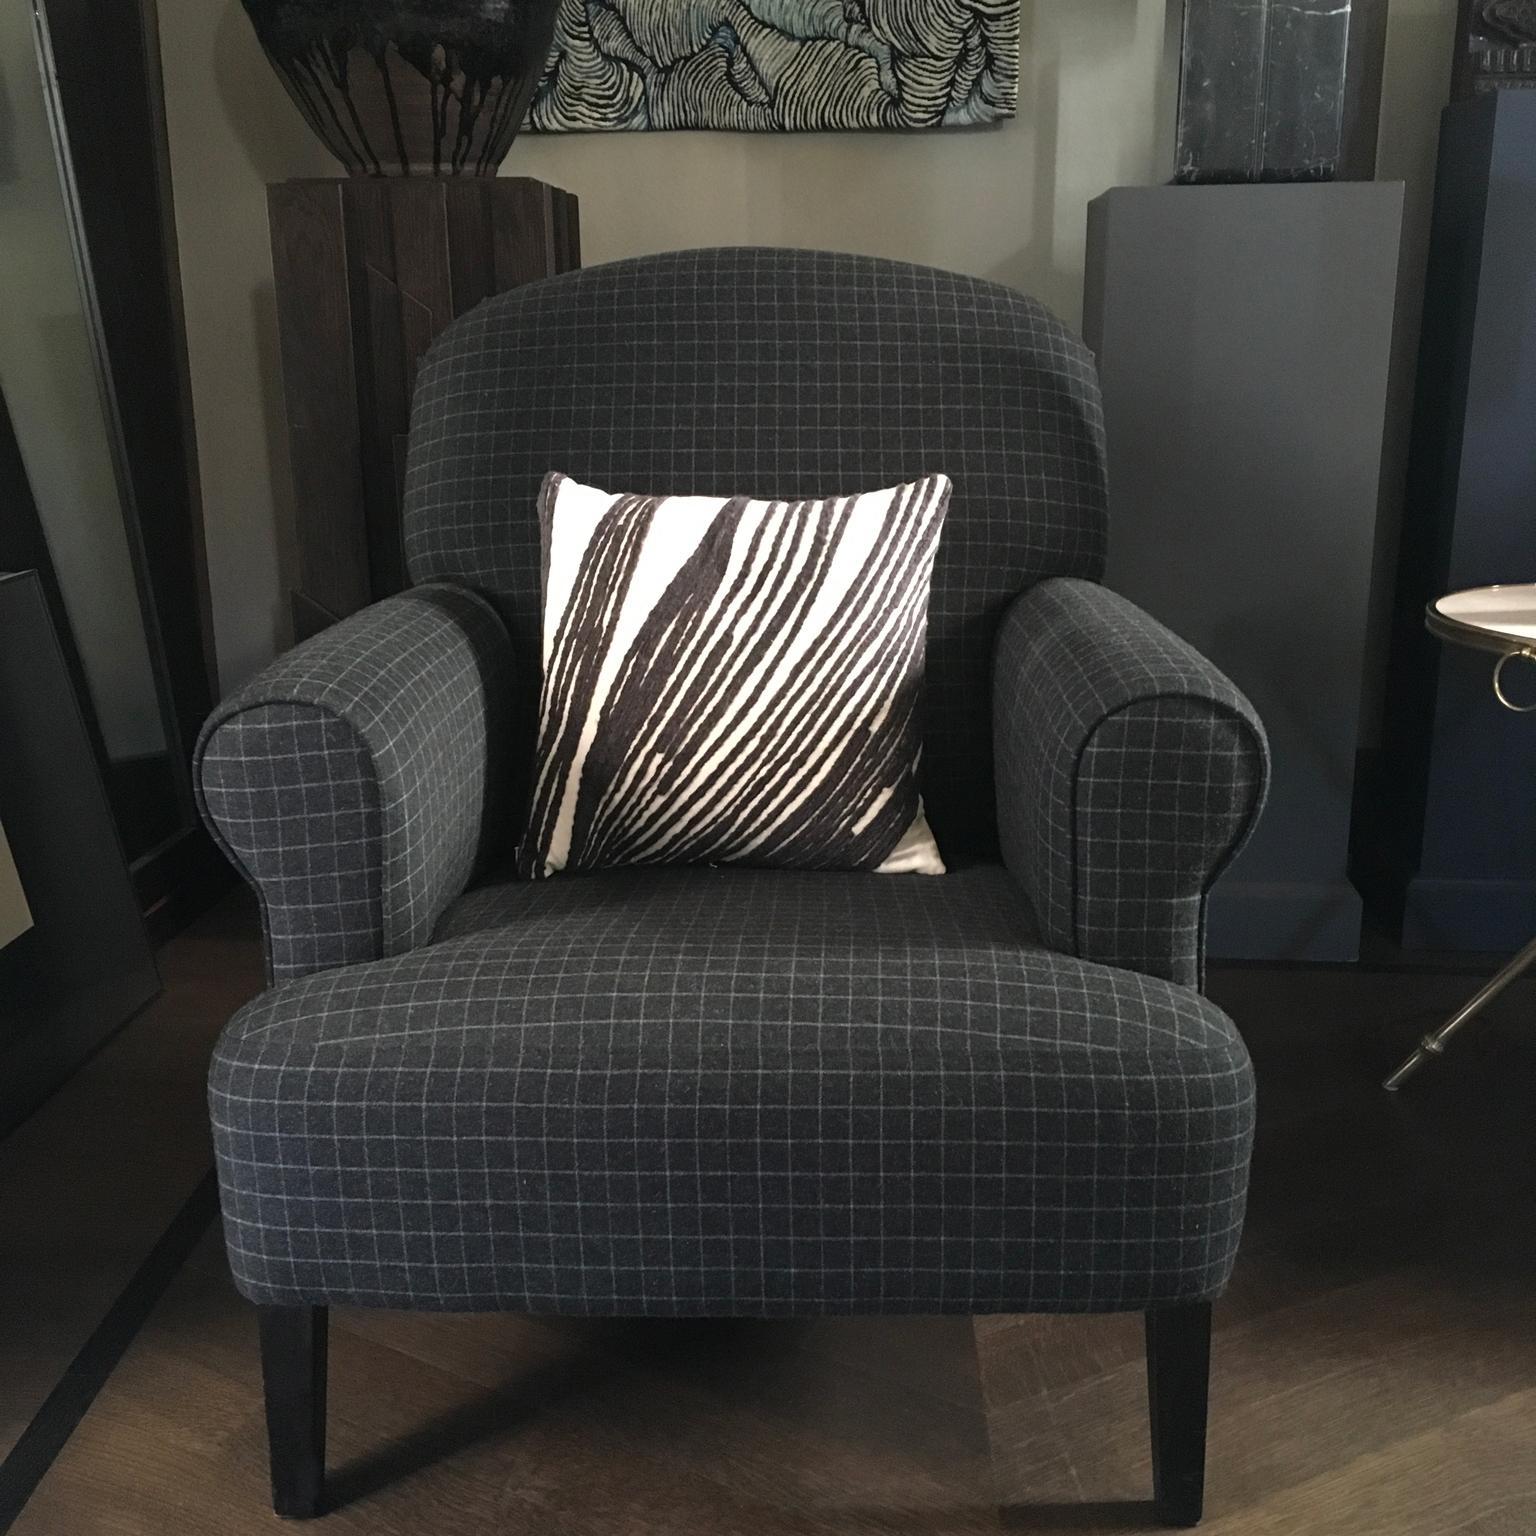 This modern armchair is presented in a wool grey checkered fabric. The result is an elegant presence to complete little and cosy spaces, in the living room or bedroom, where to read or have relax listening music.
Piece of Flamant Home